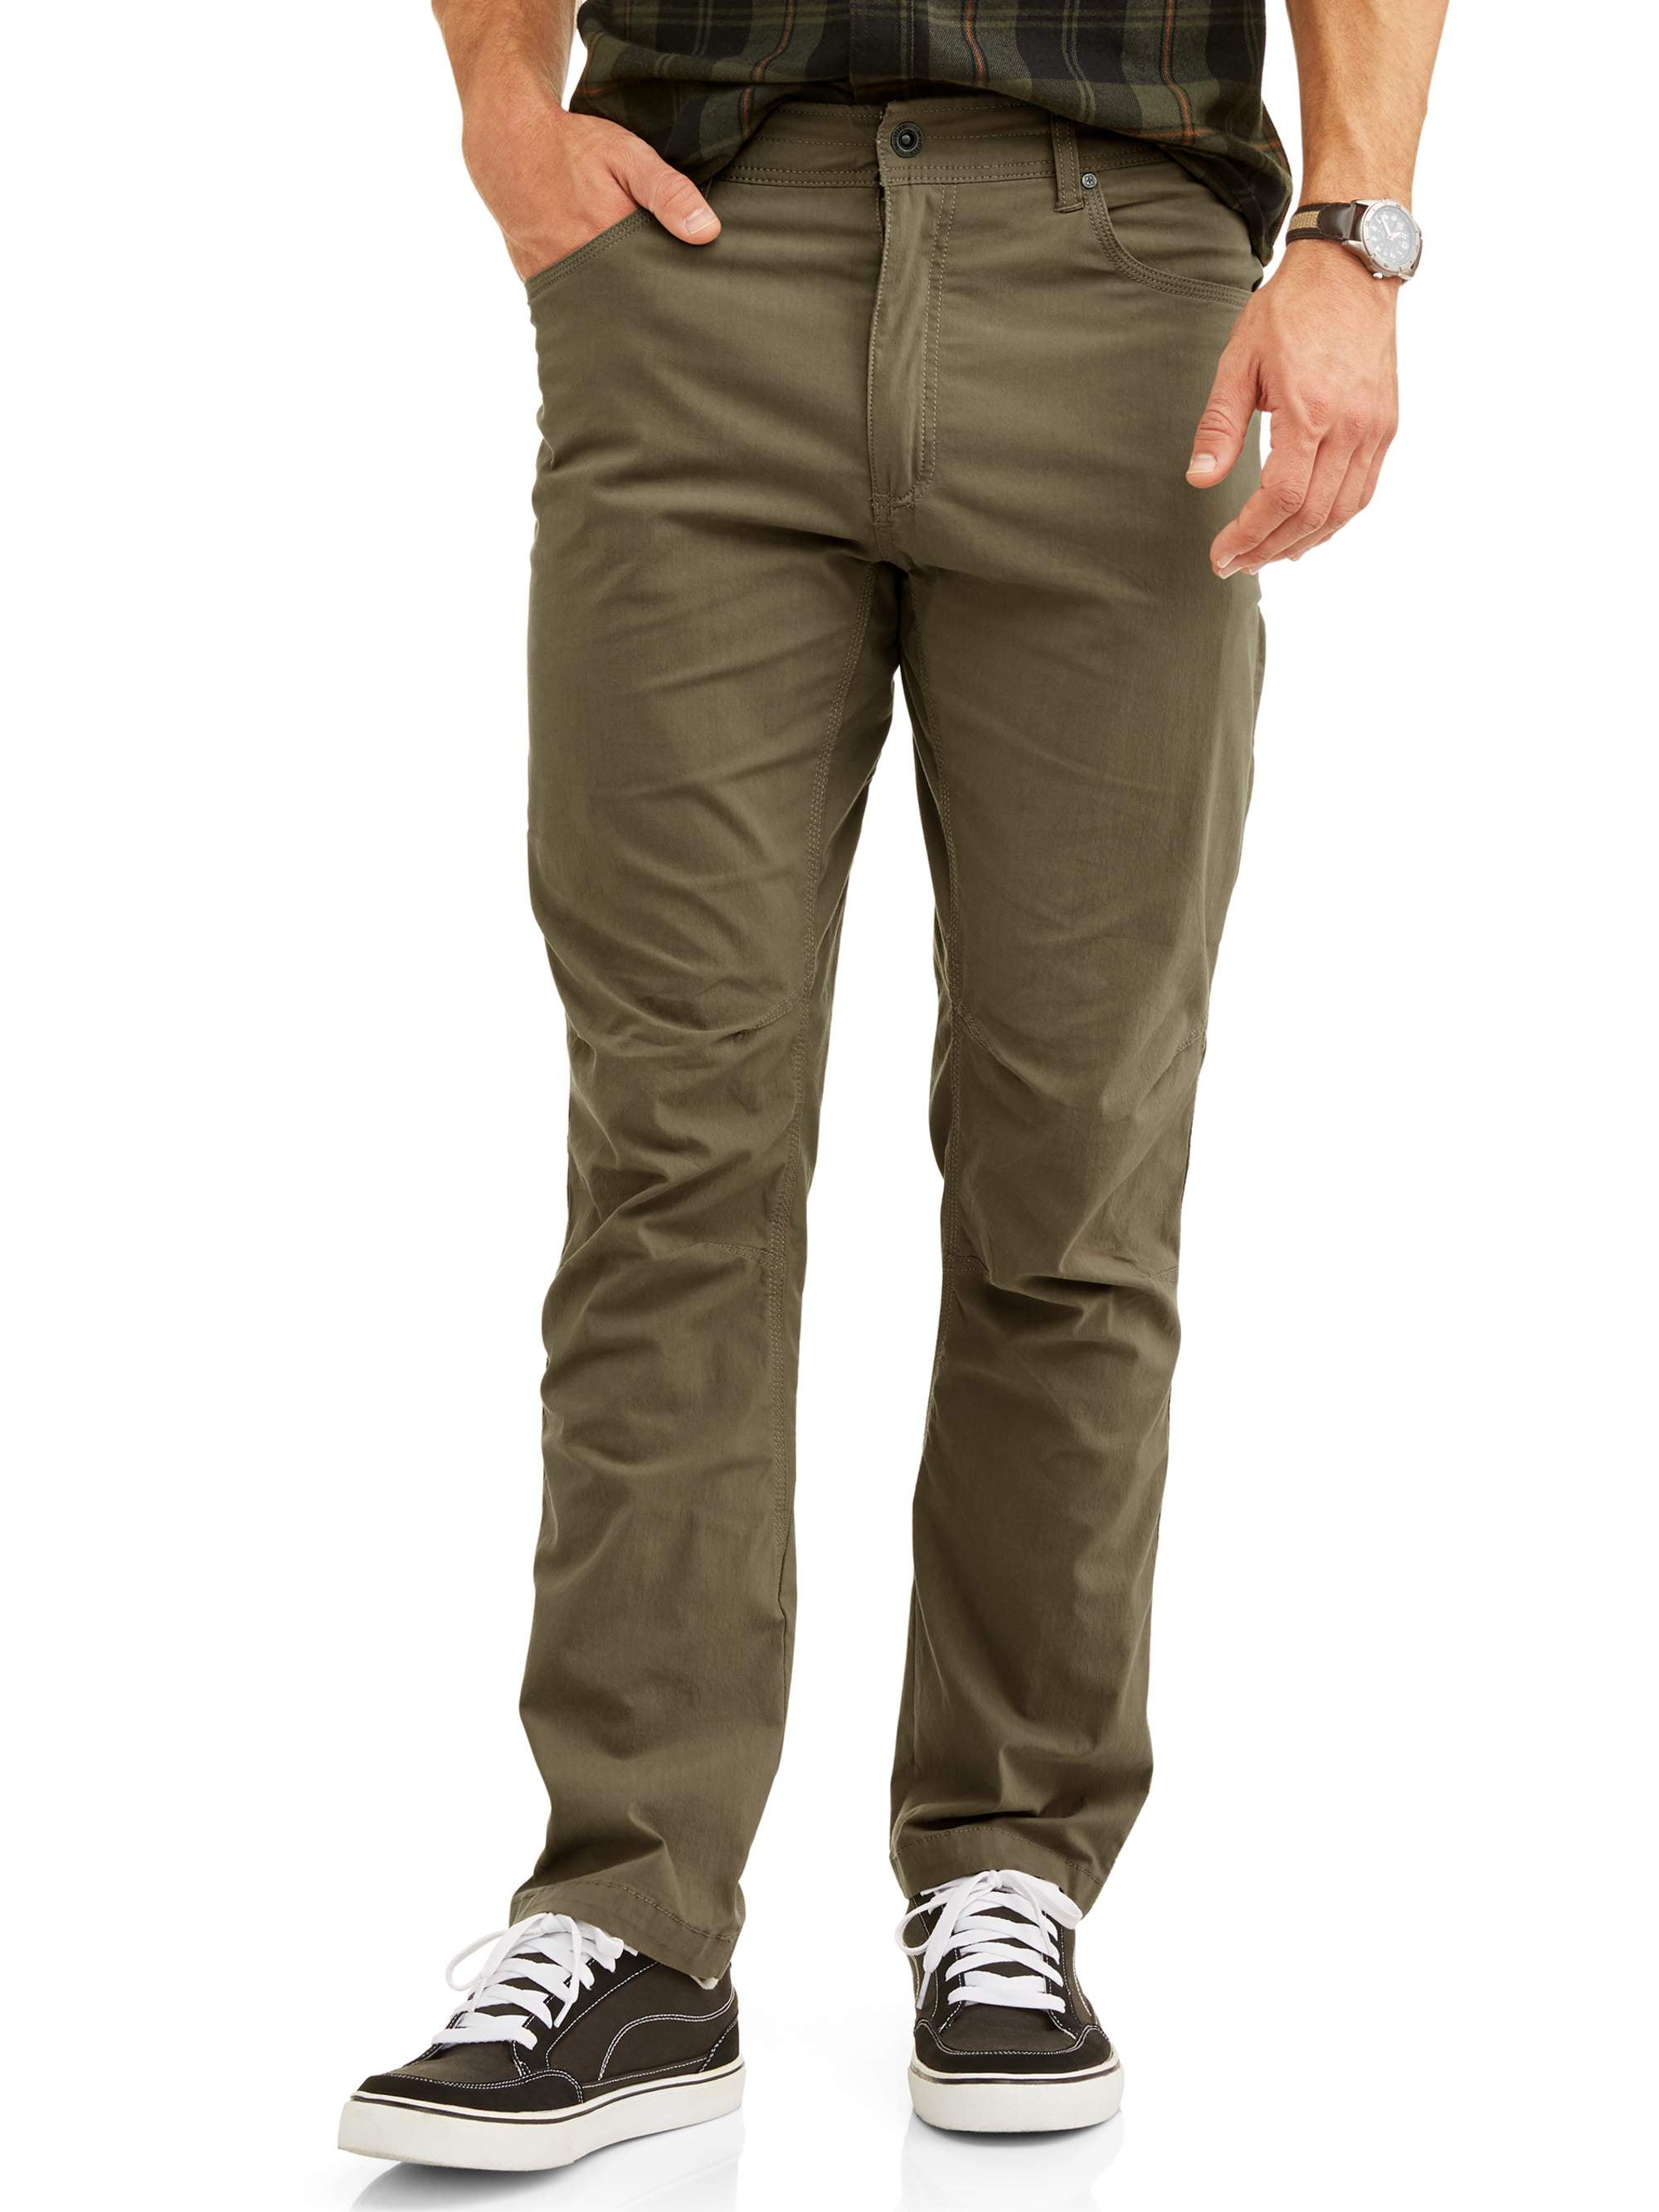 Orvis Womens Ultralight Convertible Wader- ON Sale !! Was $398 Now